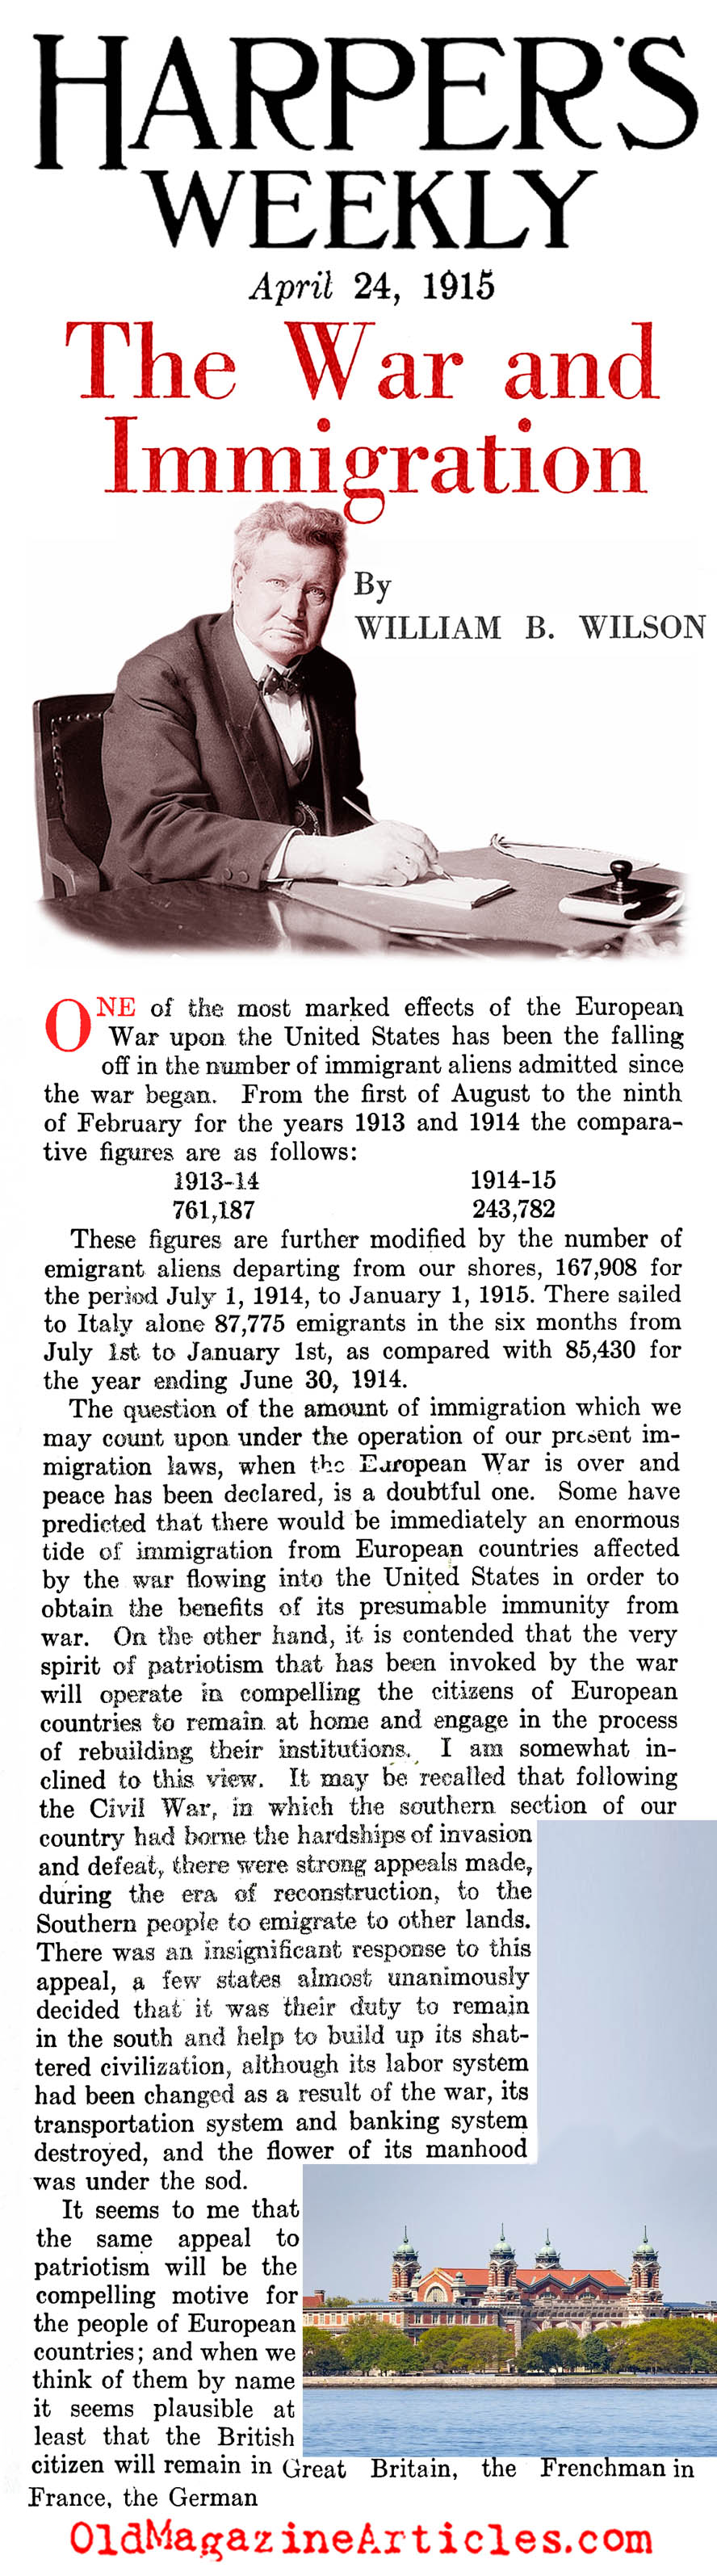 W.W. I and Immigration (Harper's Weekly, 1915)